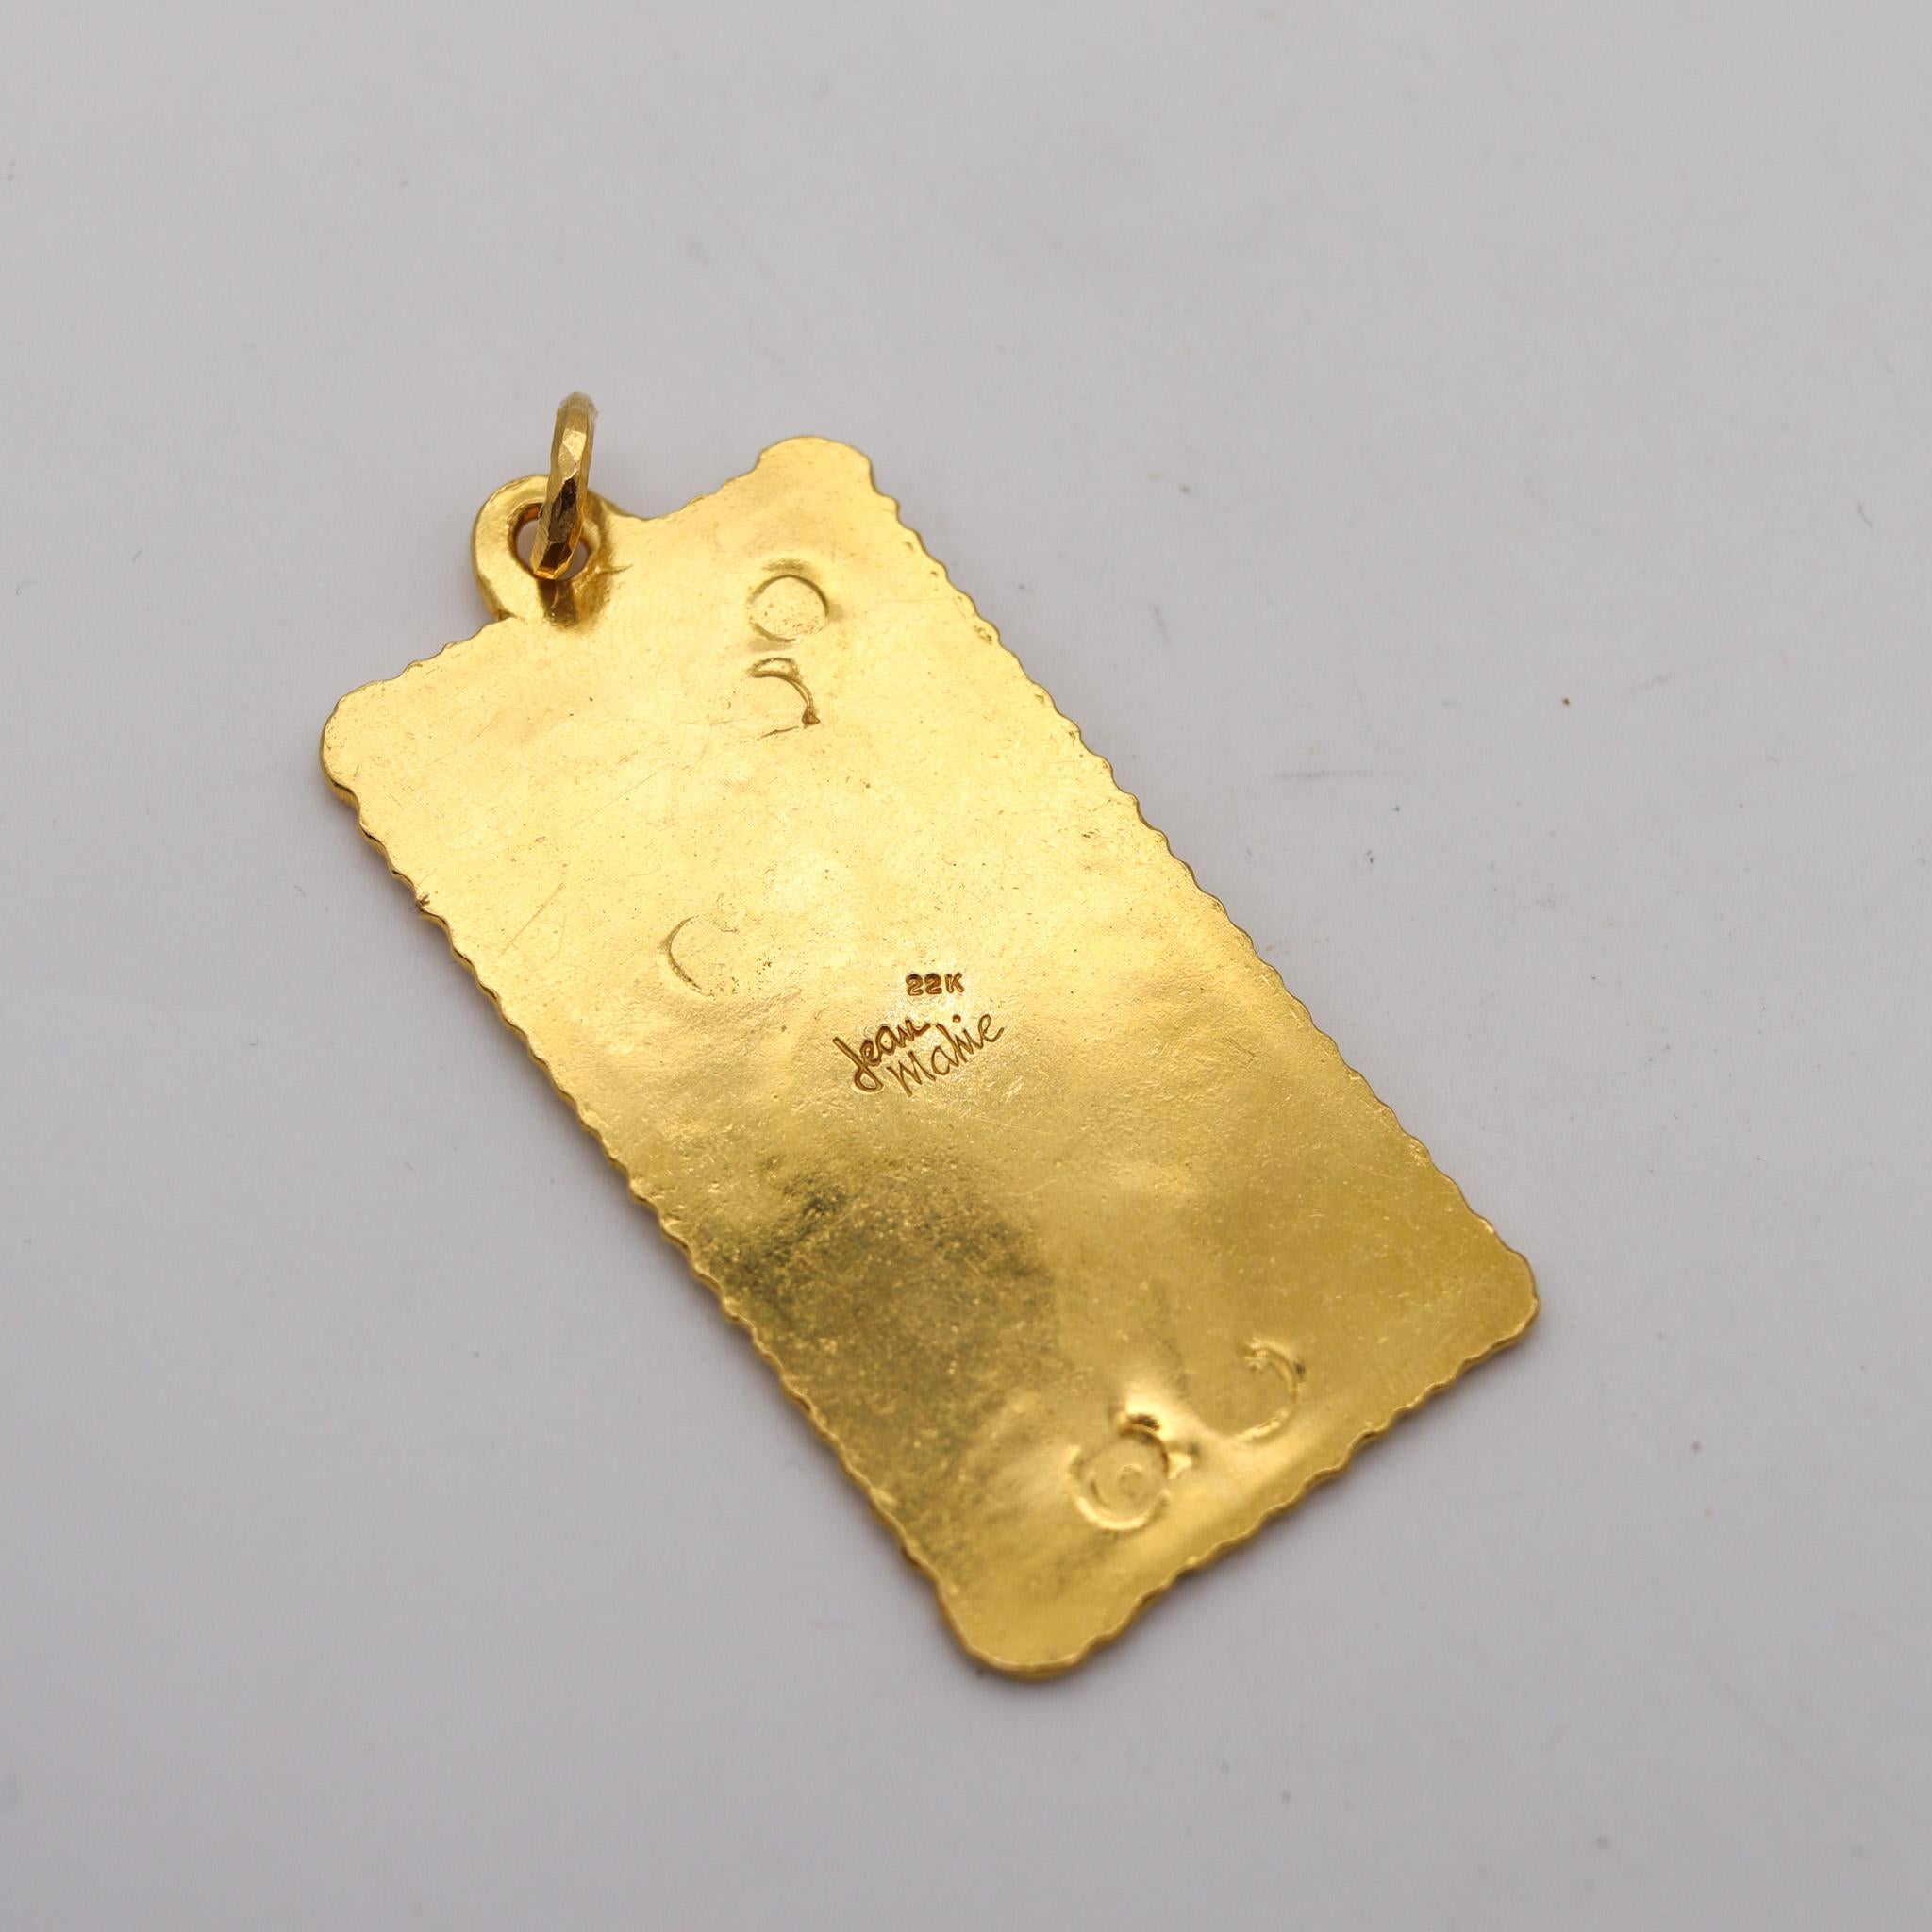 Jean Mahie 1970 Paris Rare Sculptural Figurative Pendant Solid 22Kt Yellow Gold In Excellent Condition For Sale In Miami, FL